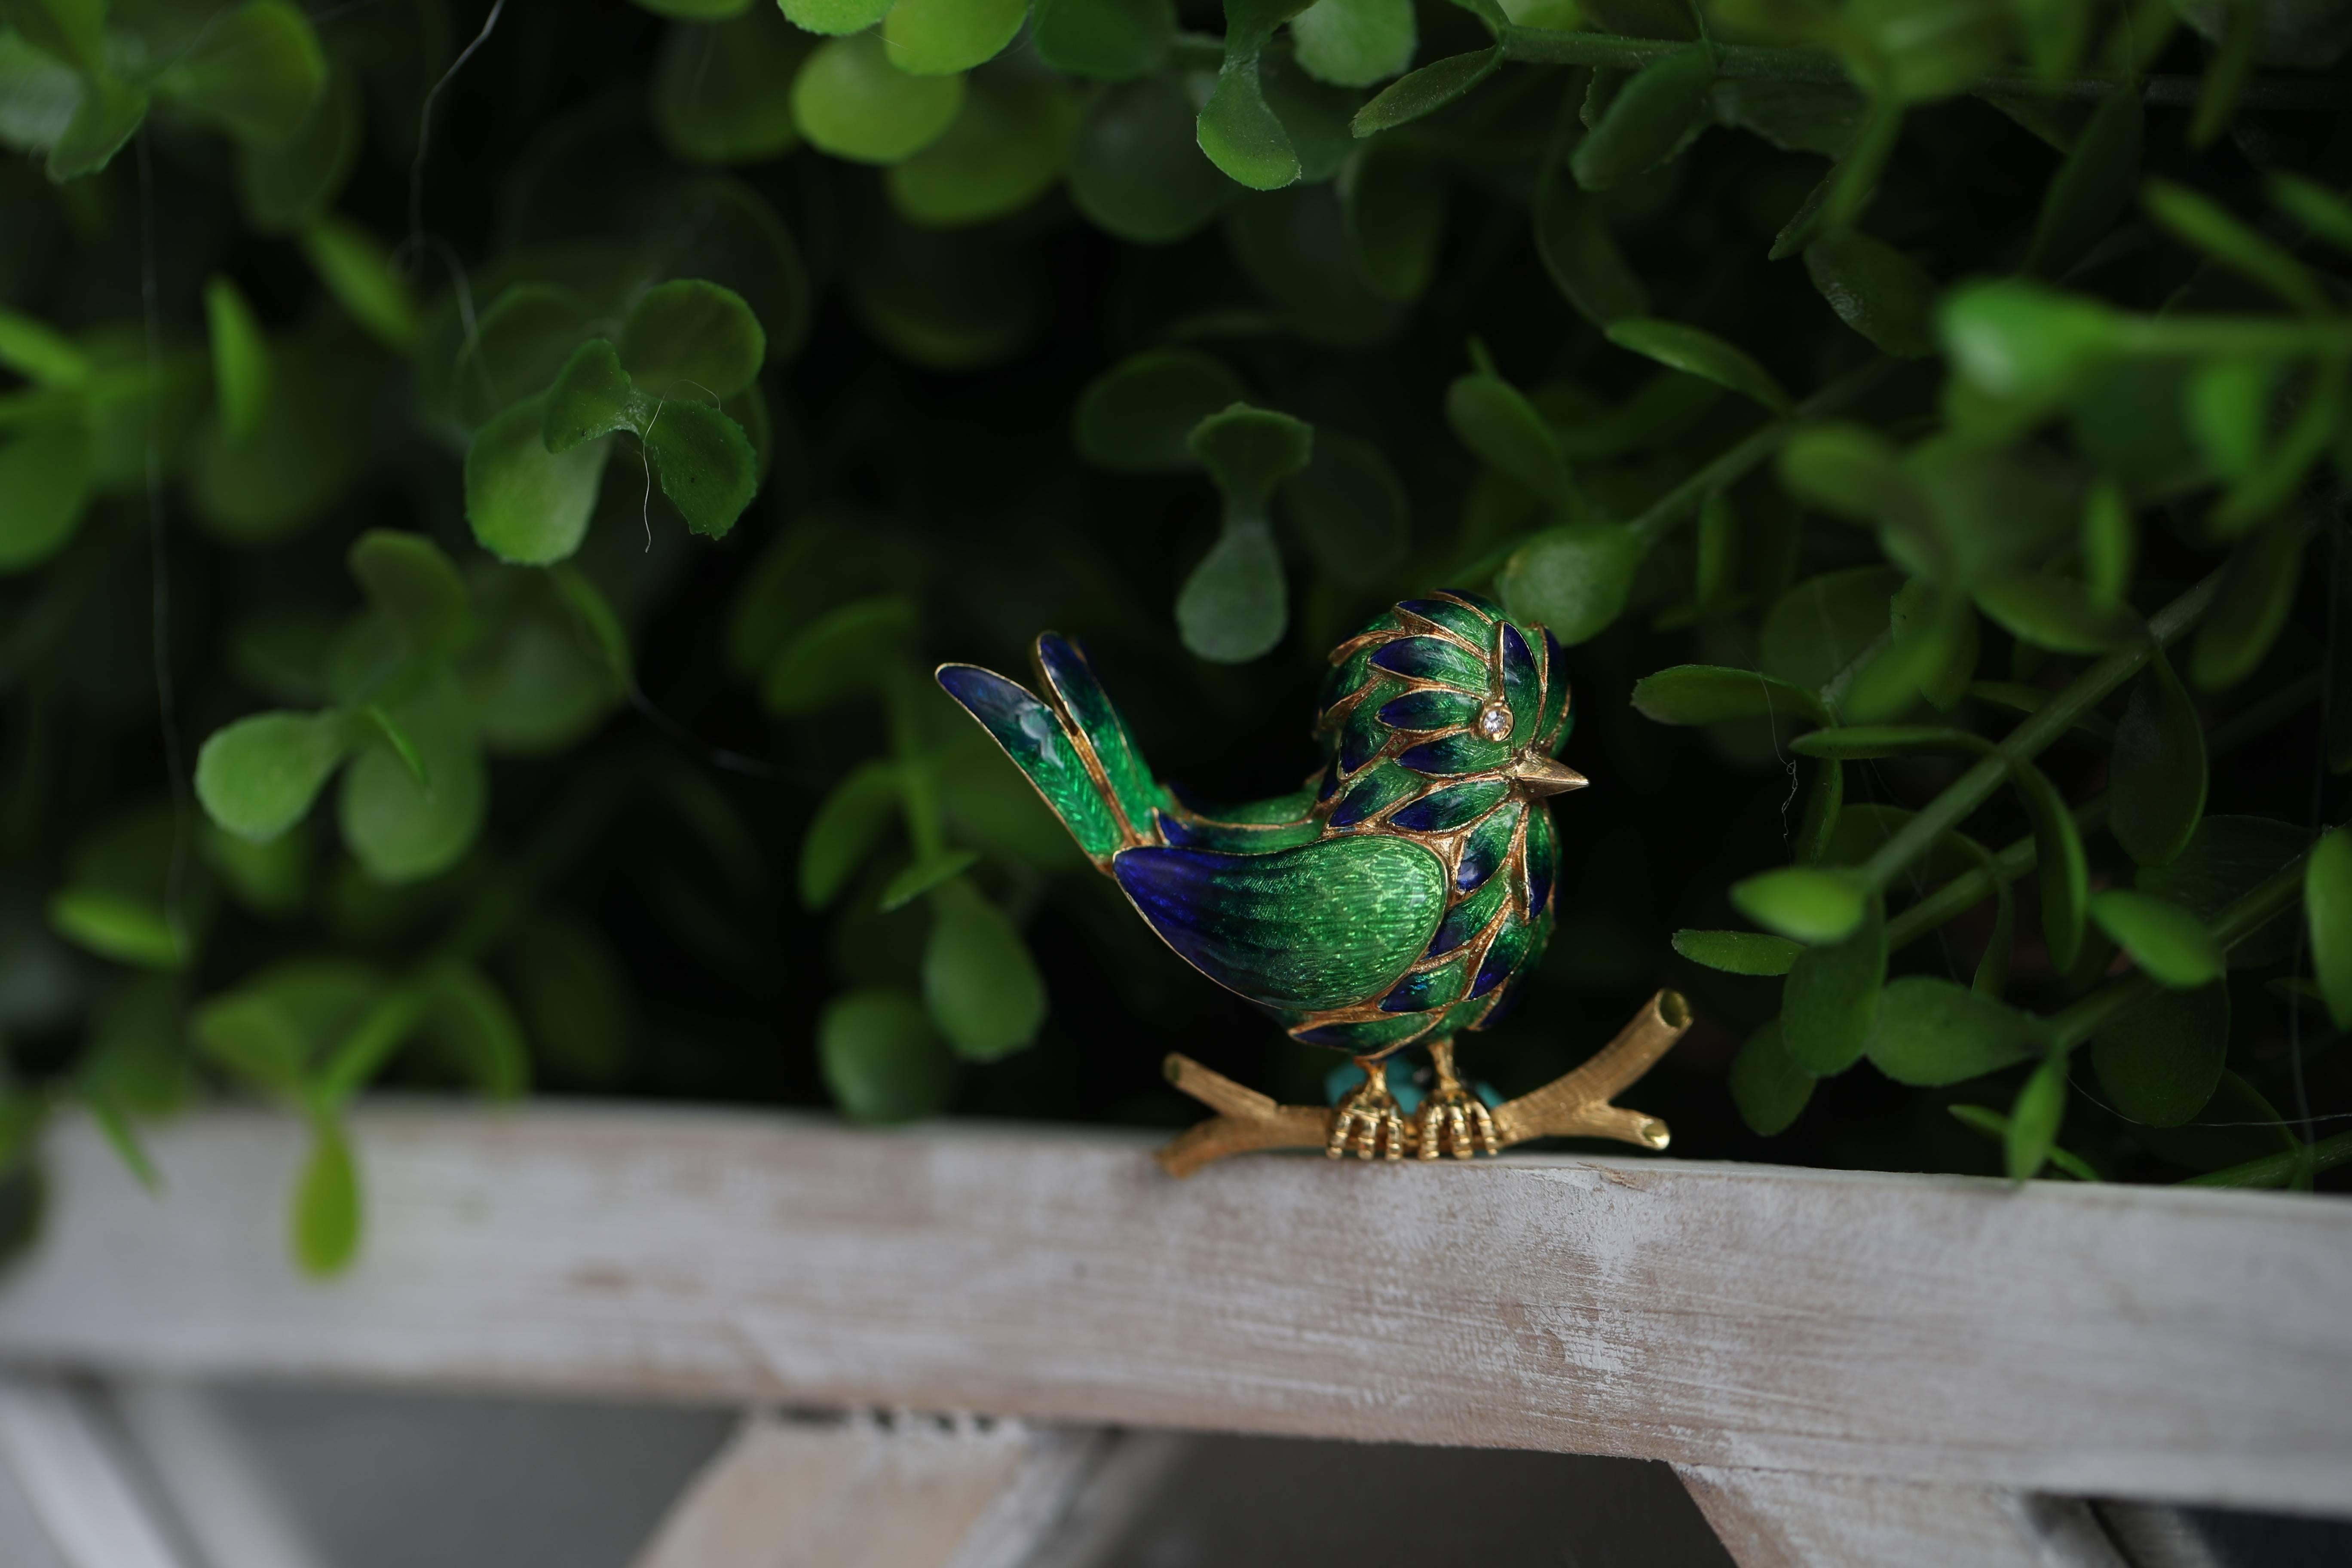 1960s Enamel, Diamond and 18 Karat Yellow Gold Bird Brooch, Lapel Pin

Features an Exquisitely coloured Enamel Bird sitting on an 18 Karat Gold Branch. This Colorful Bird has rich, Emerald Green Plumage. The Tips of the Tail feathers, Wings and Body